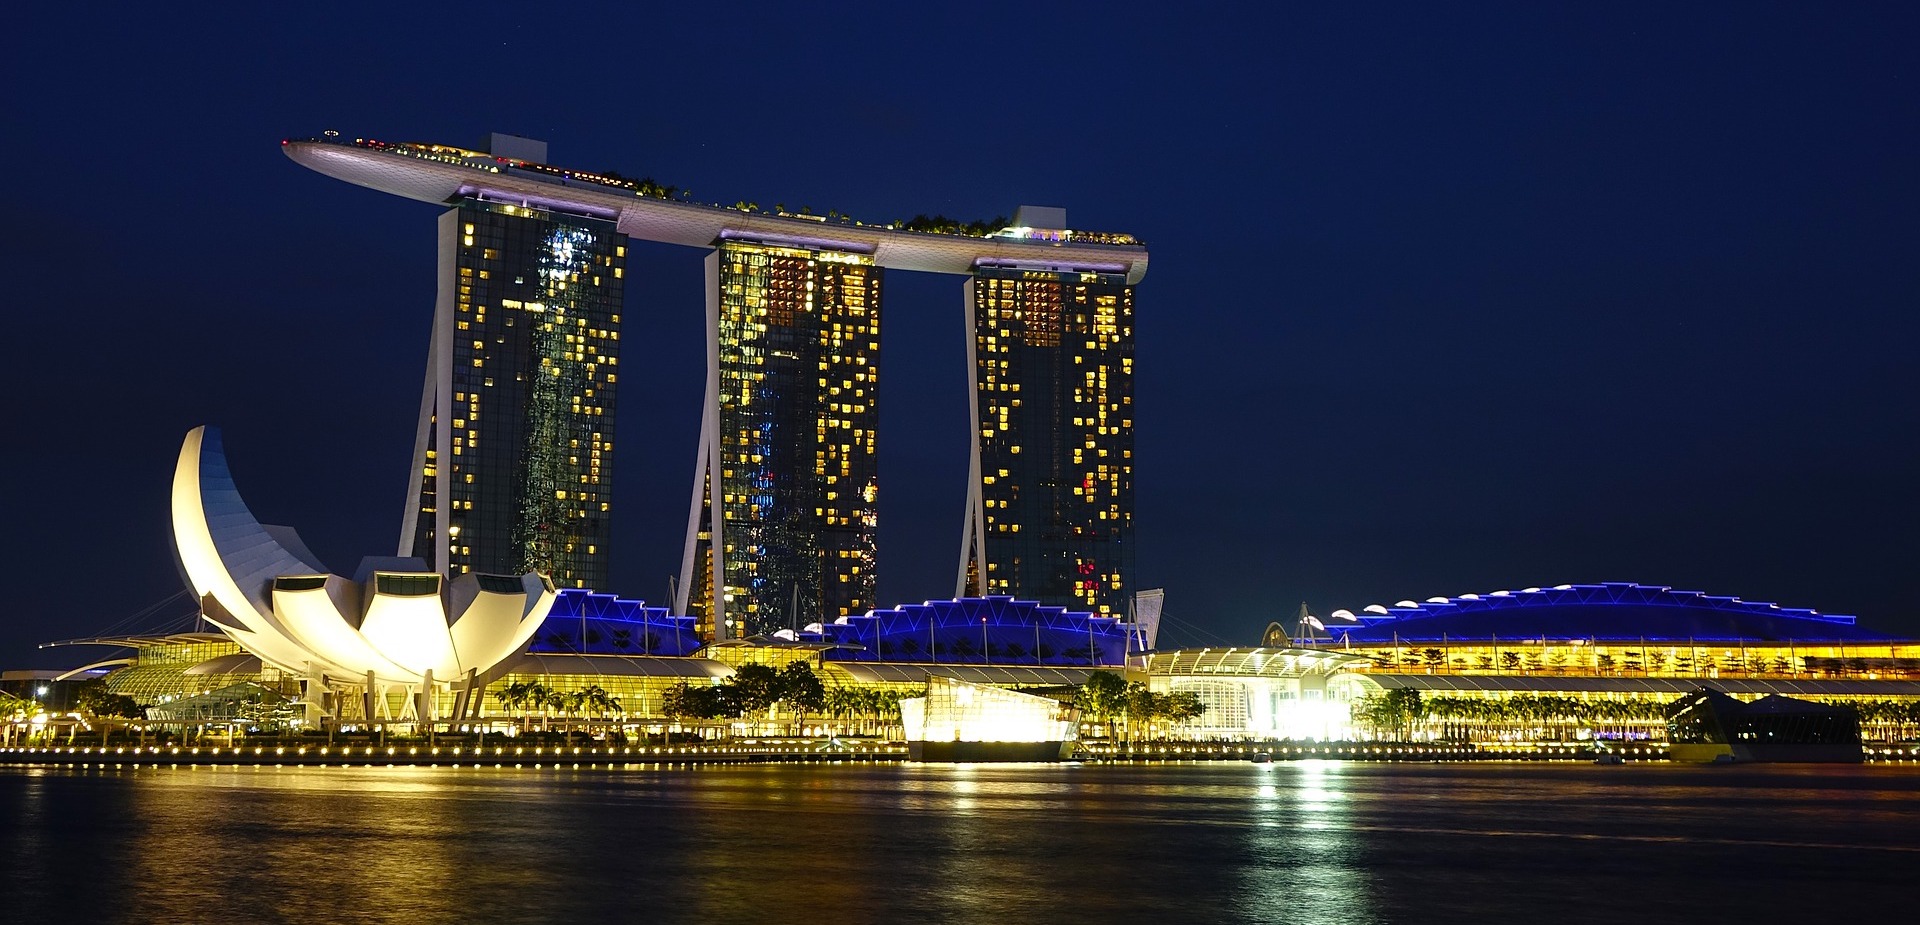 Marina Bay Sands skyline with lights and a body of water